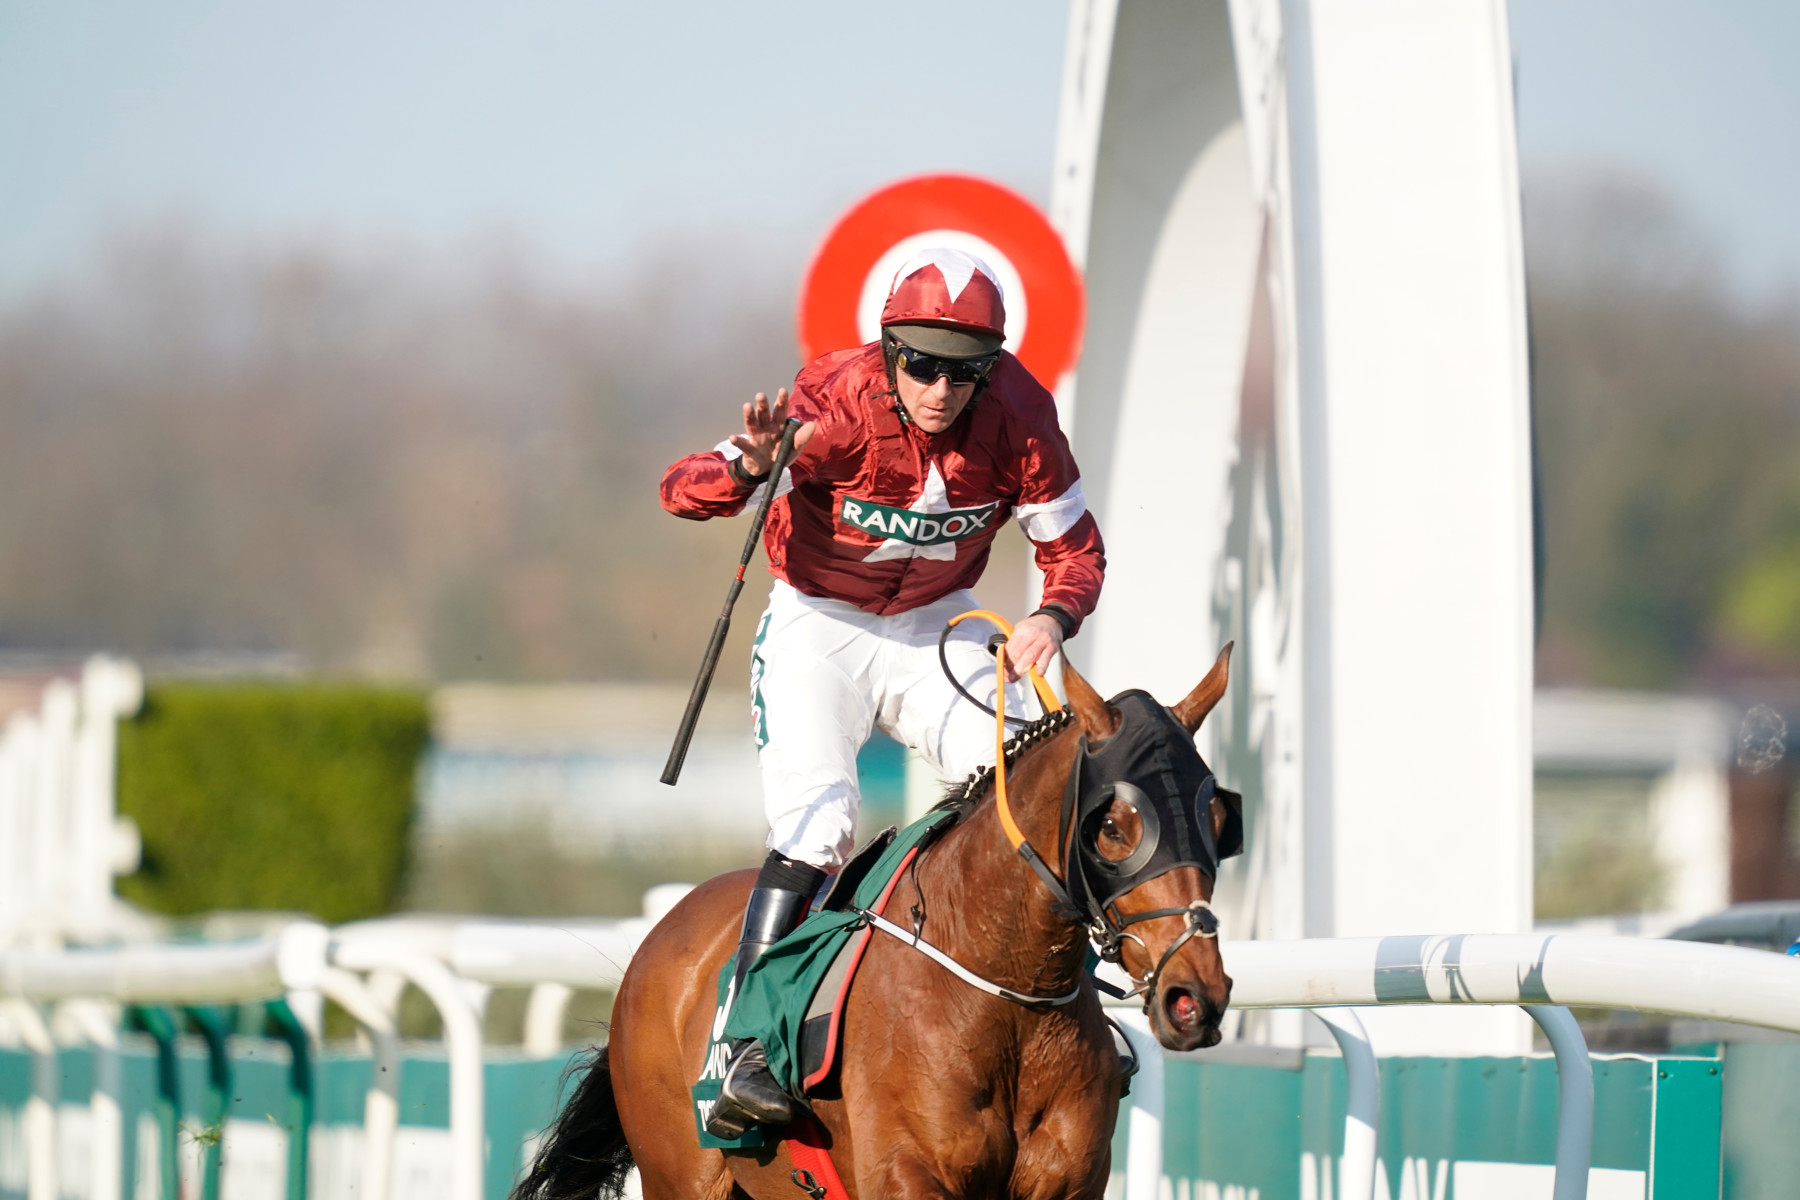 , Get 40/1 for Tiger Roll to win at the Cheltenham Festival on Wednesday